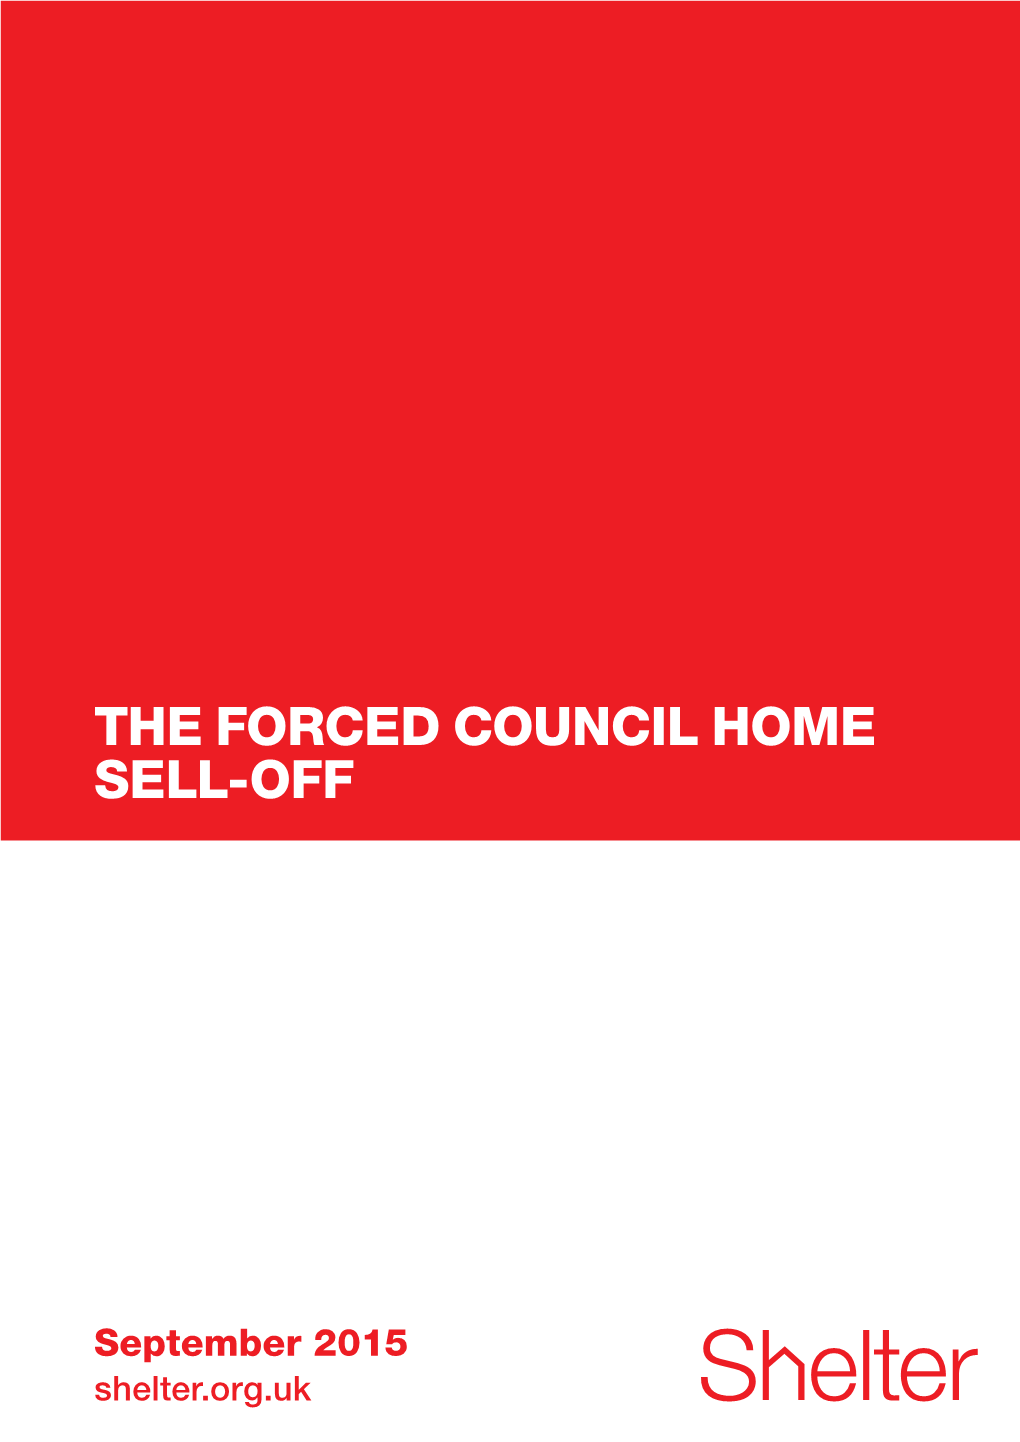 The Forced Council Home Sell-Off